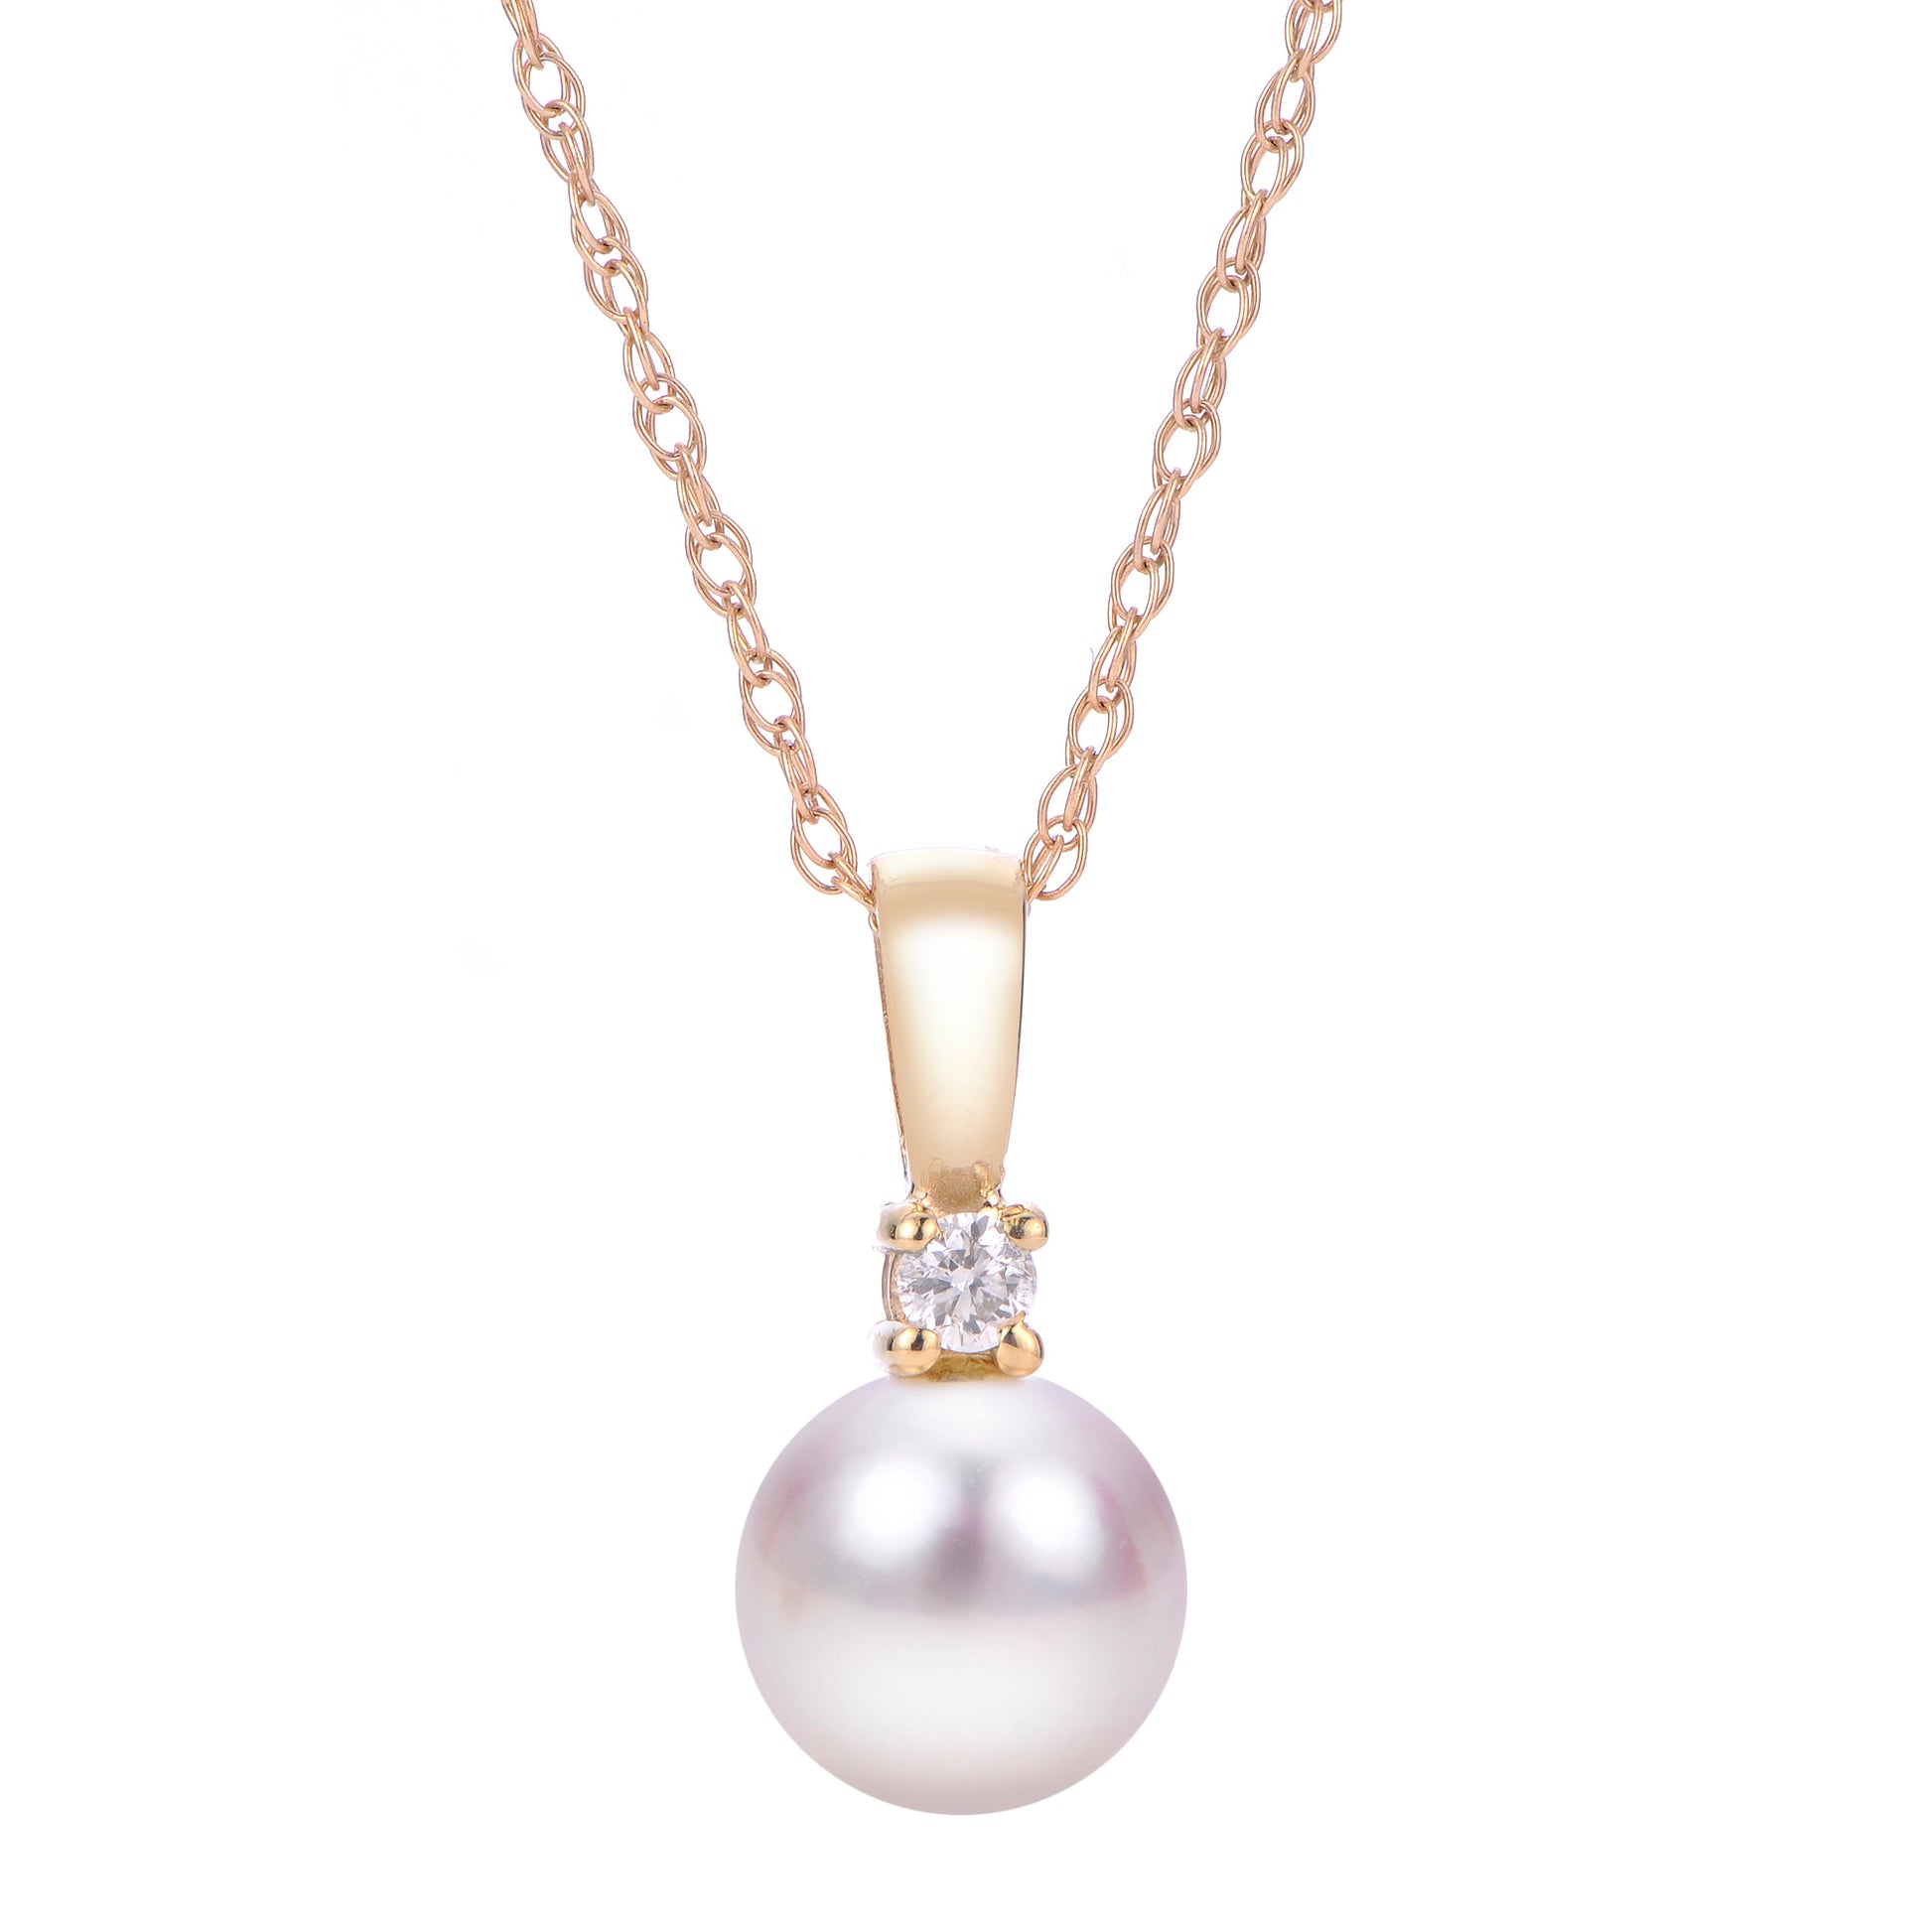 Imperial Pearl 8mm Akoya Pearl Pendant With Diamond Accent - Pearl Necklace